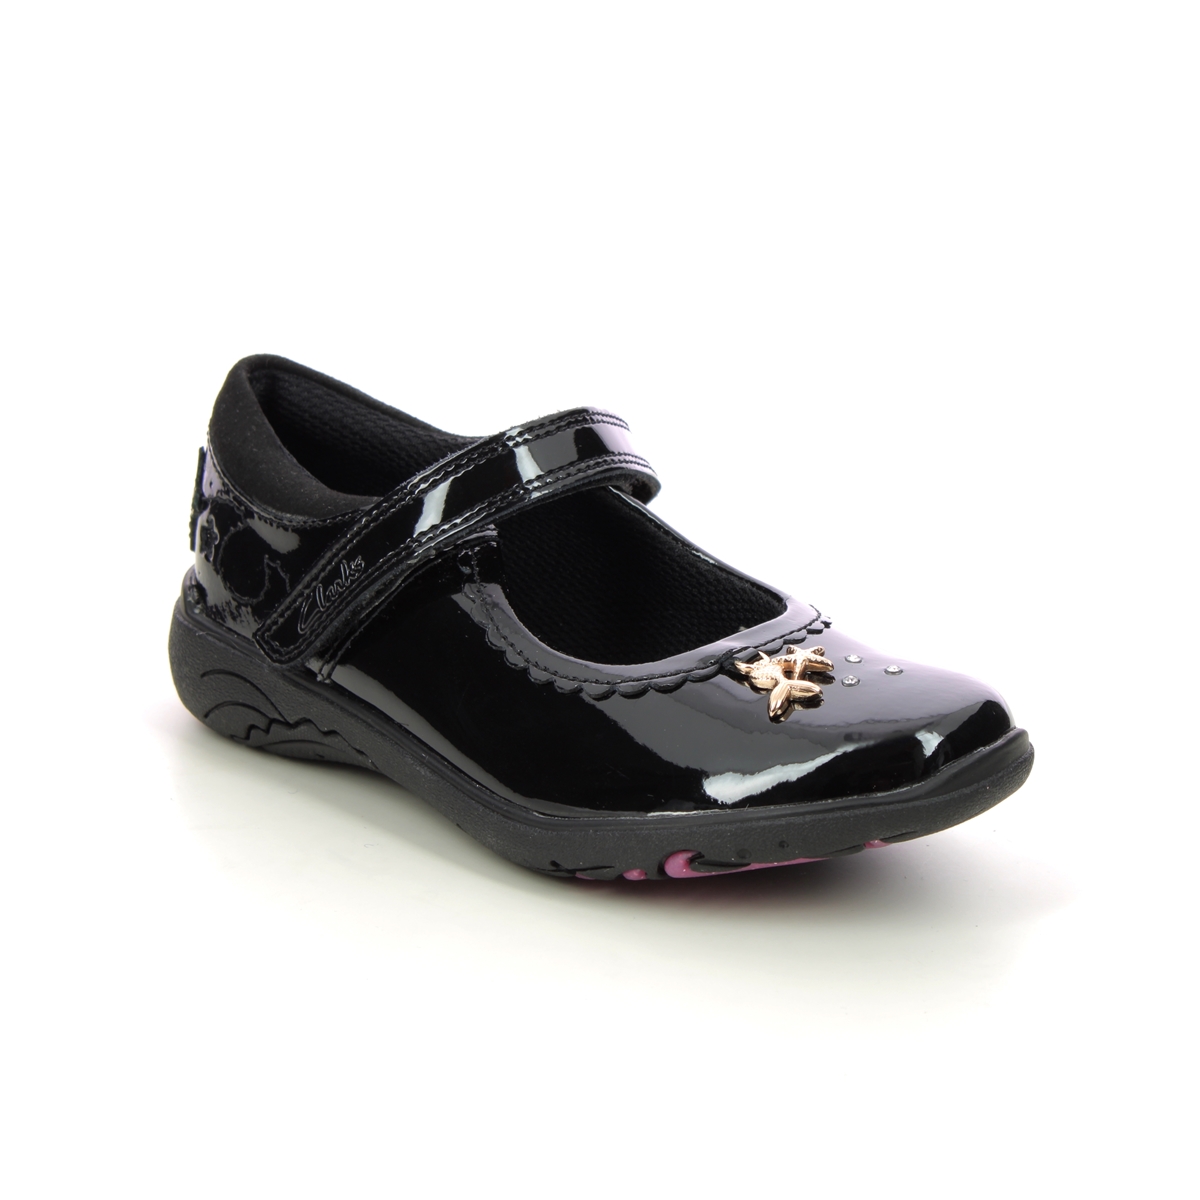 Clarks Relda Sea K Mary Jane Black Patent Kids Girls School Shoes 722418H In Size 11.5 In Plain Black Patent H Width Fitting Extra Wide For School For